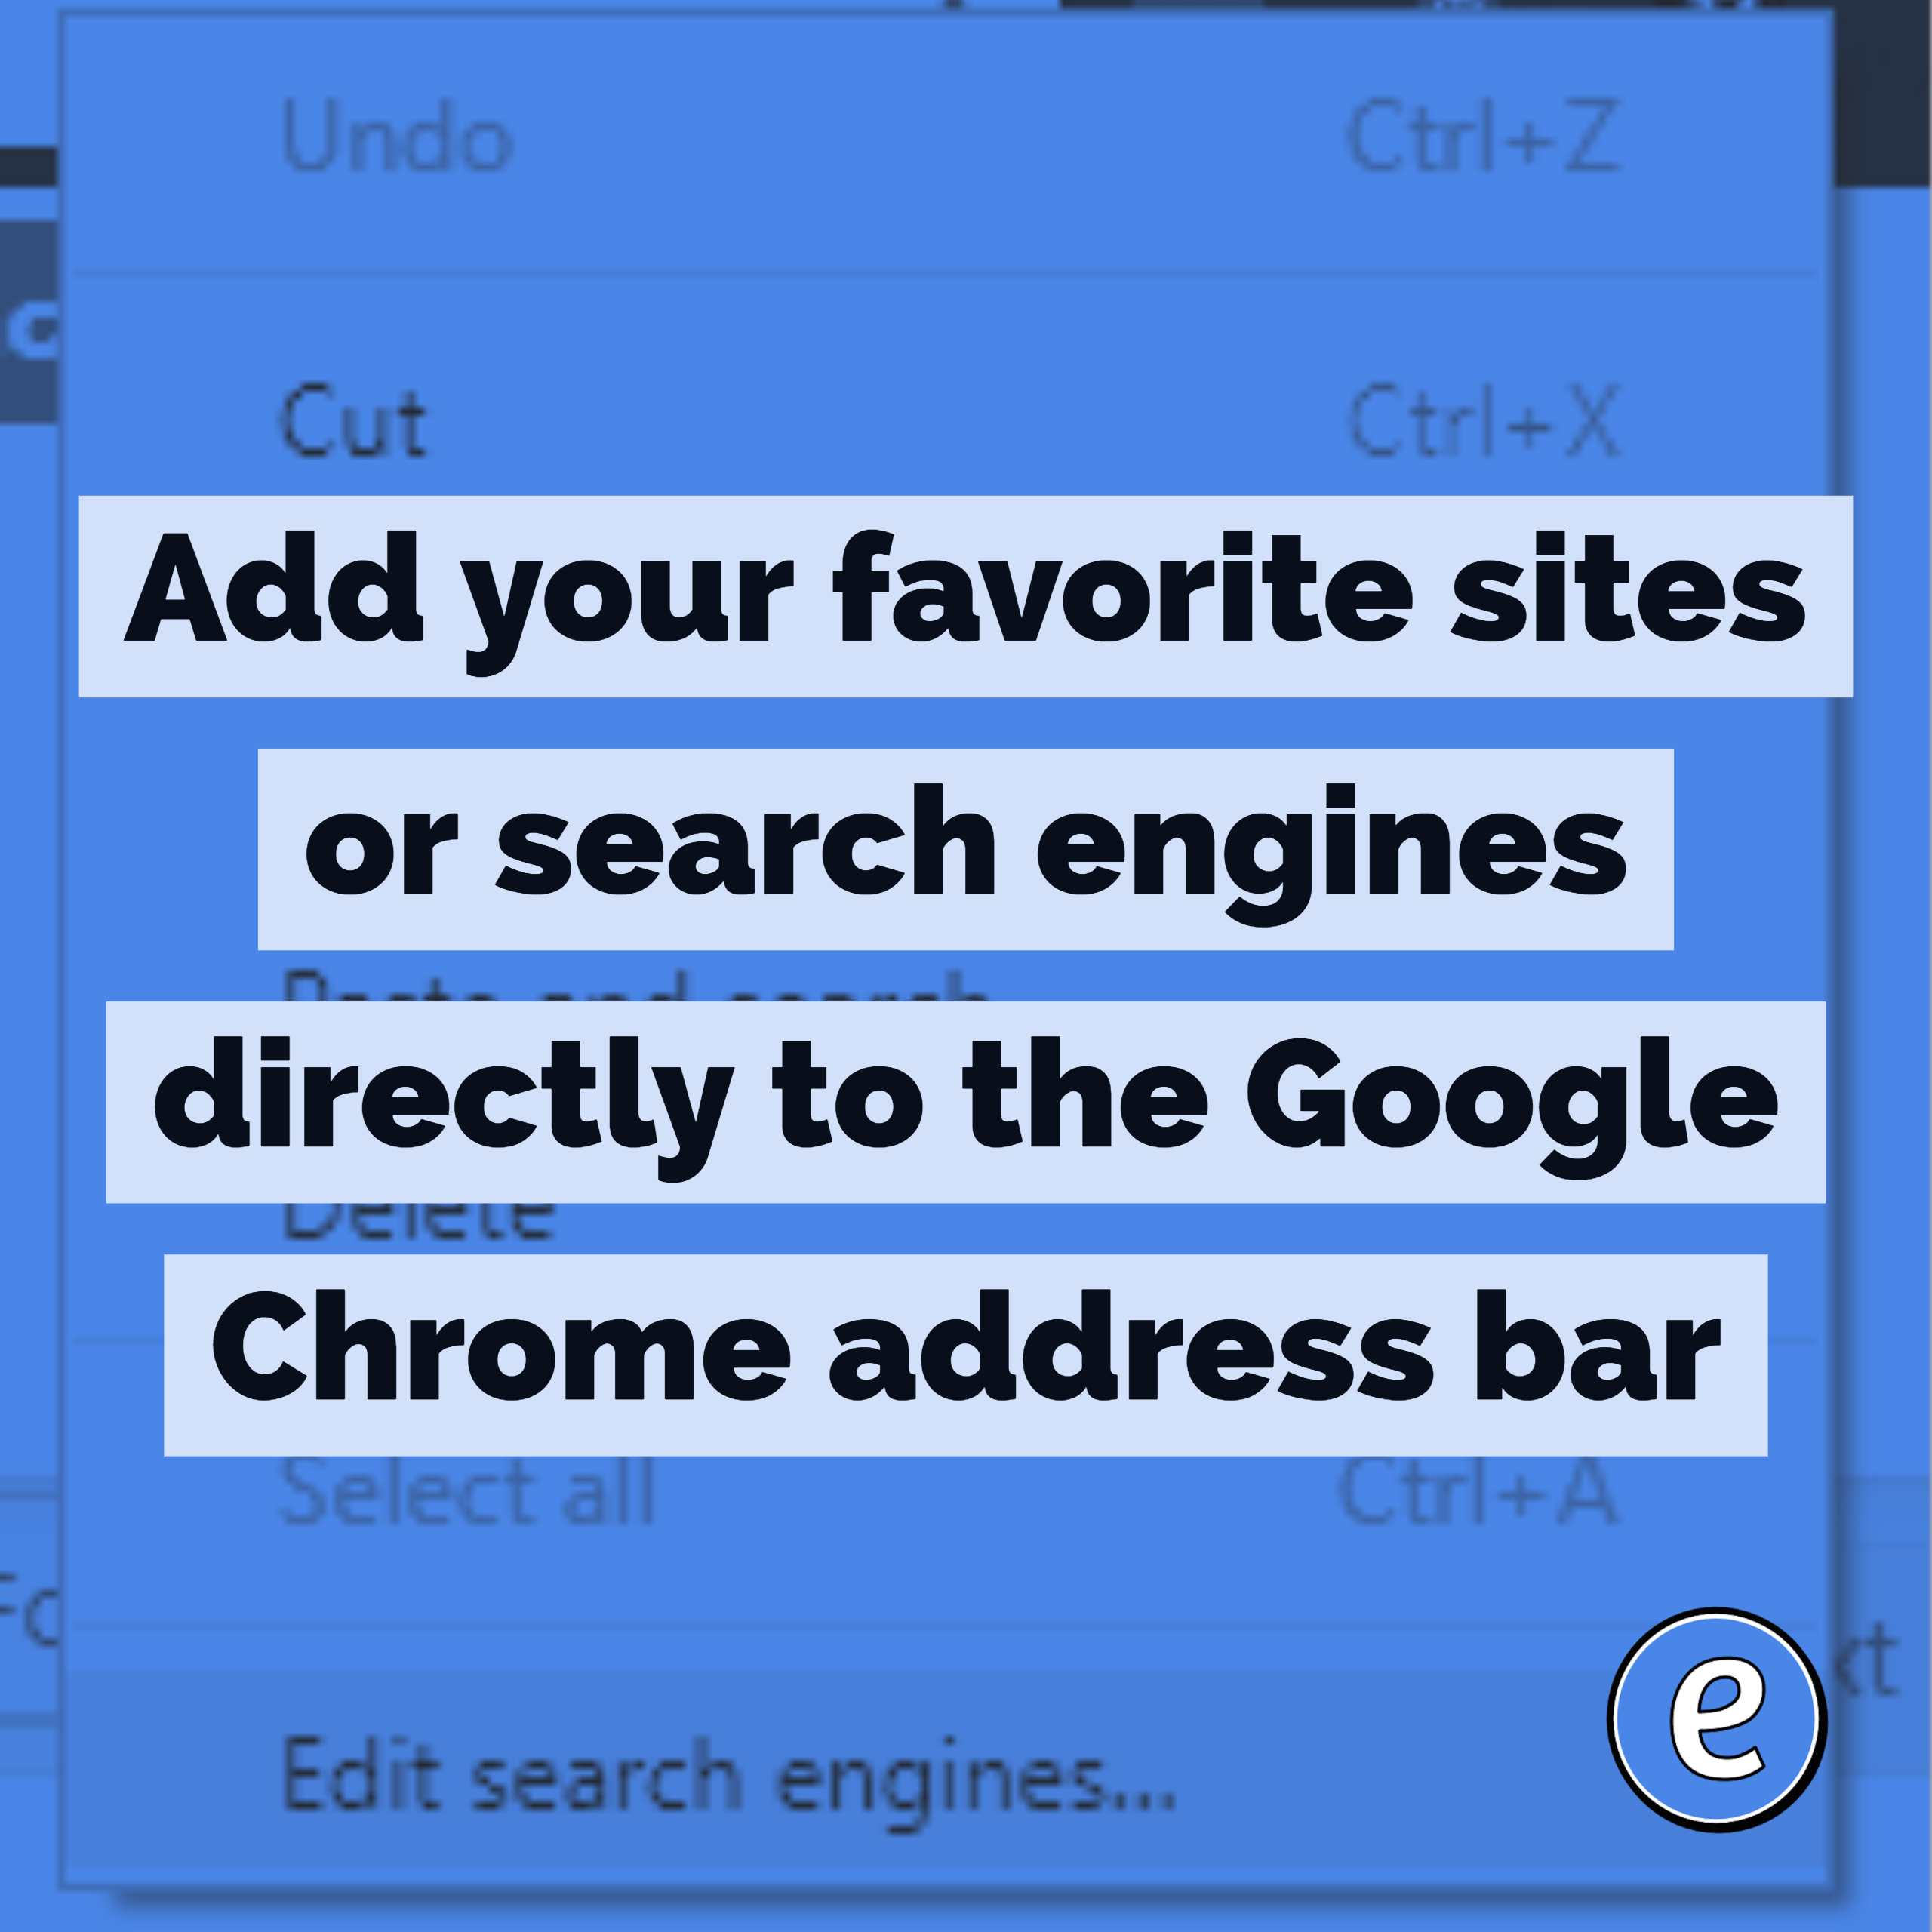 select all in chrome